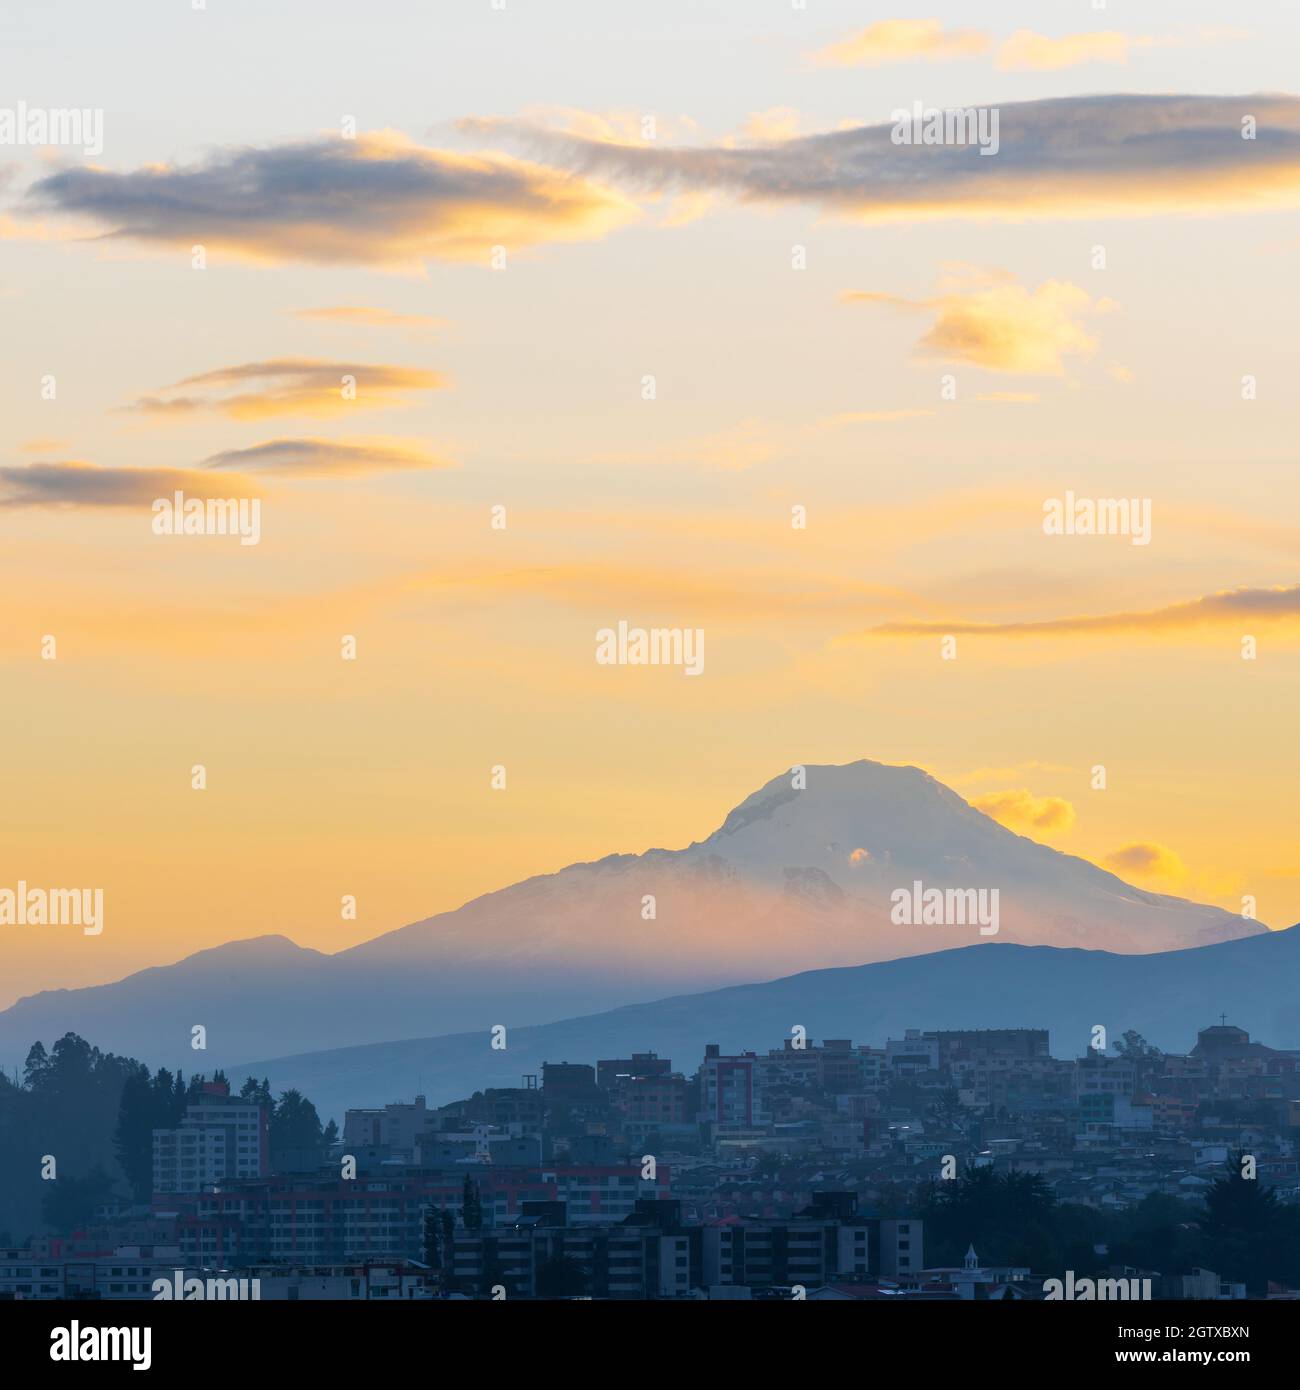 Cayambe volcano at sunrise in square format with Quito skyline, Ecuador. Stock Photo